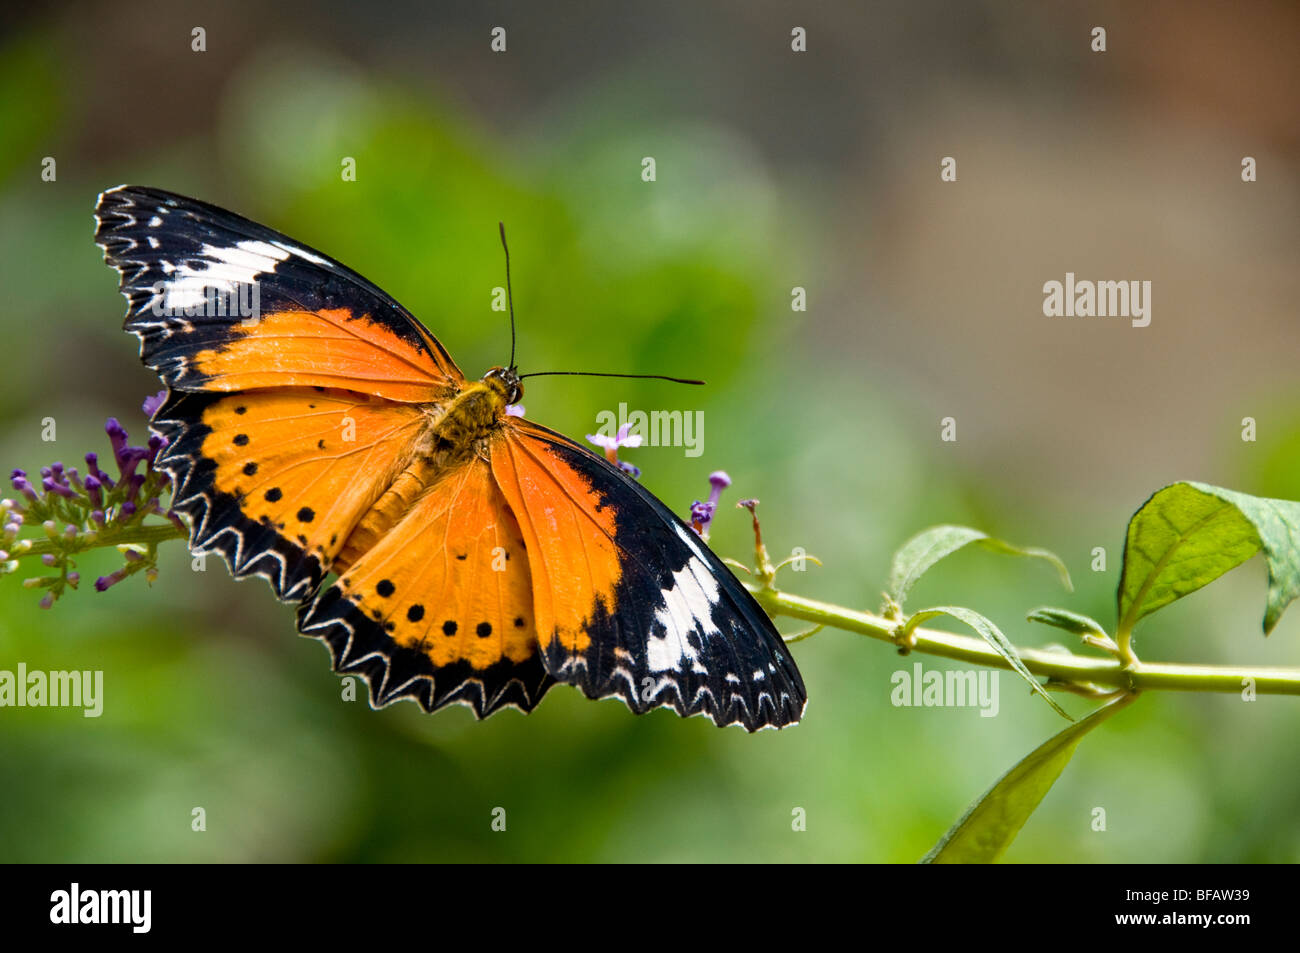 Monarch butterfly with open wings on flowers in lush sunny natural habitat Stock Photo